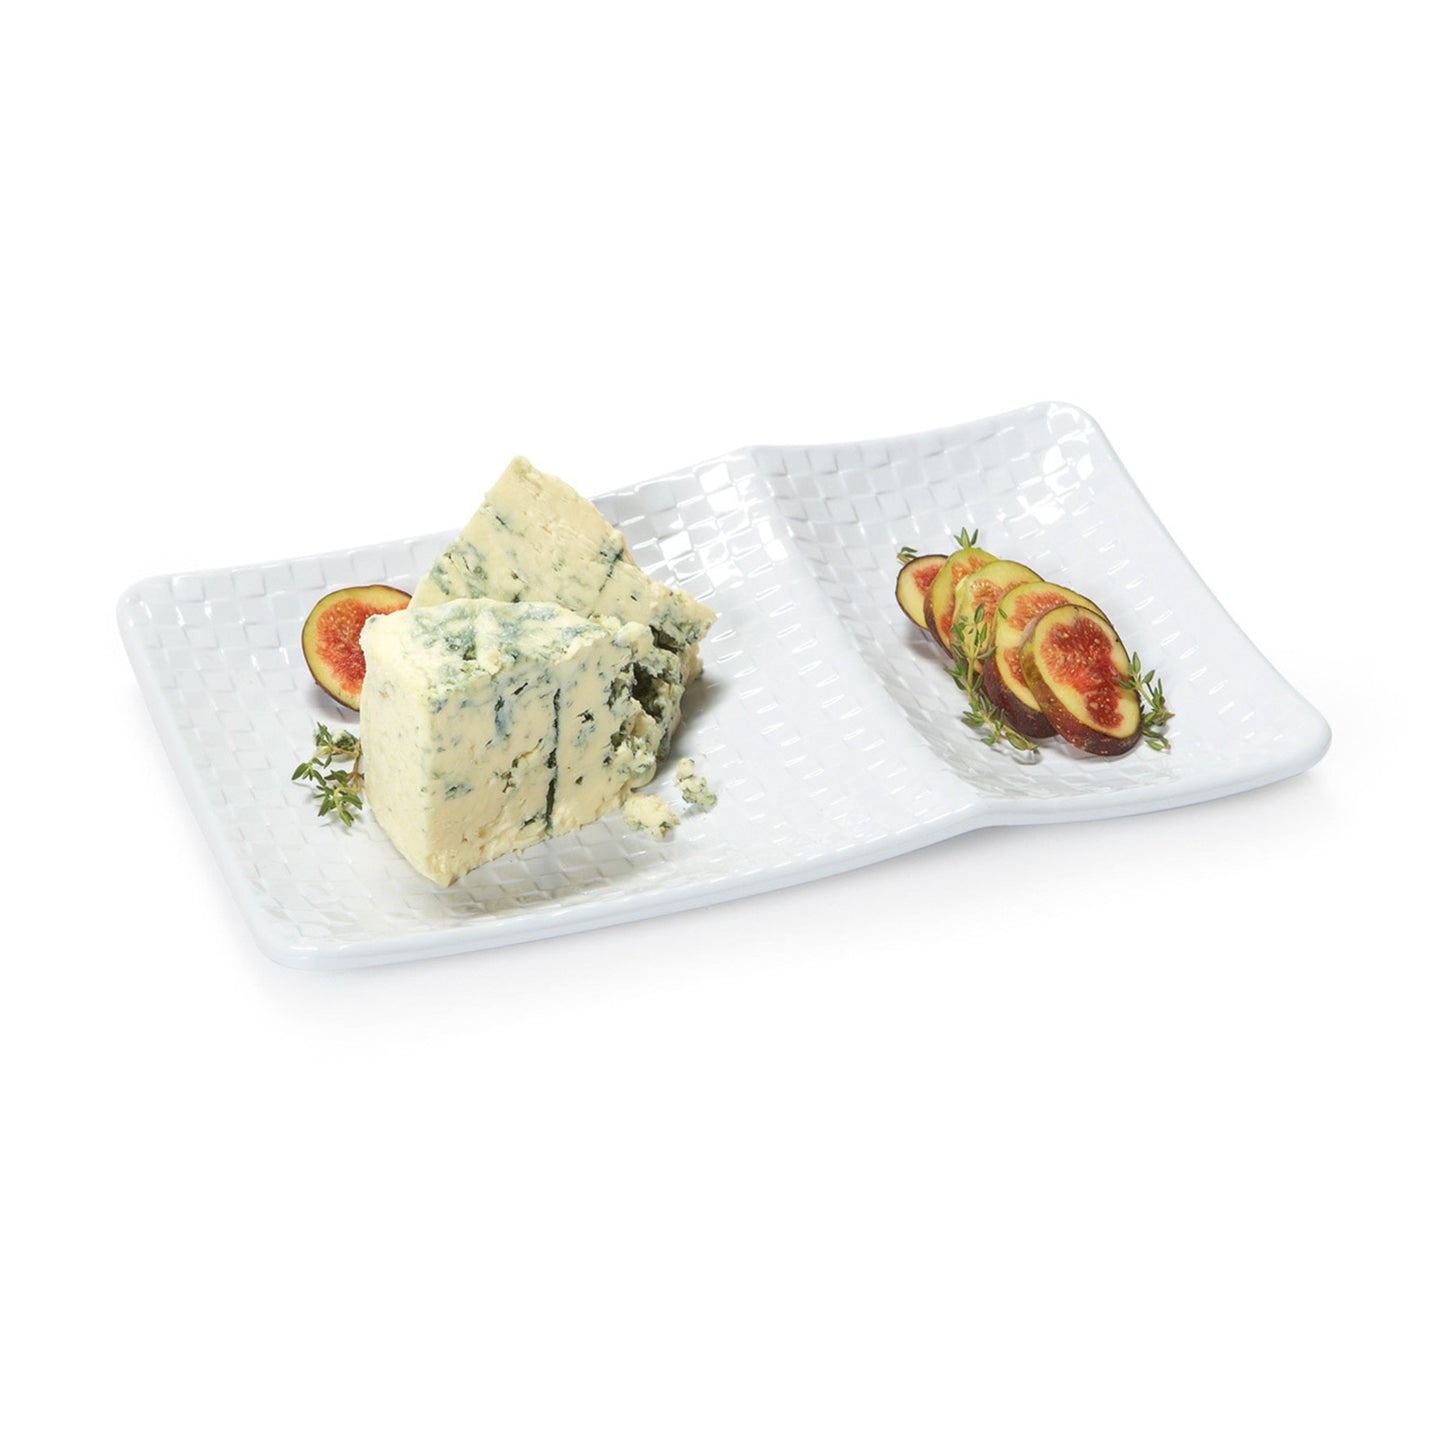 10.75'' x 6.25'' Rectangular 2-Compartment Platter (6.75" and 4" Compartments) (12 Pack)